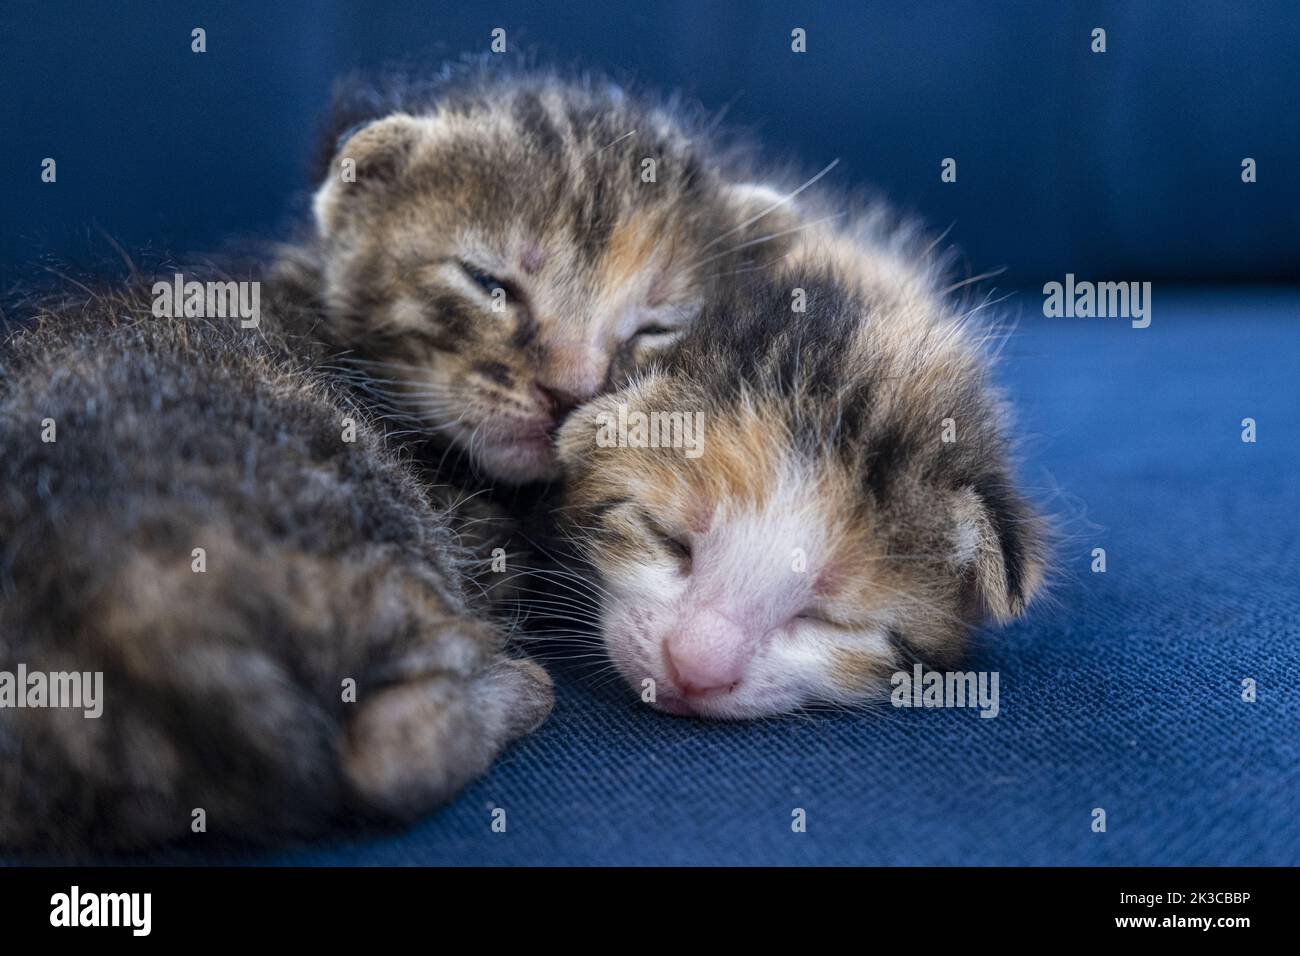 Two newborn calico tabby cats hugging each other and sleeping, adorable newborn baby cat, kitten concept, half-open eye small cat Stock Photo